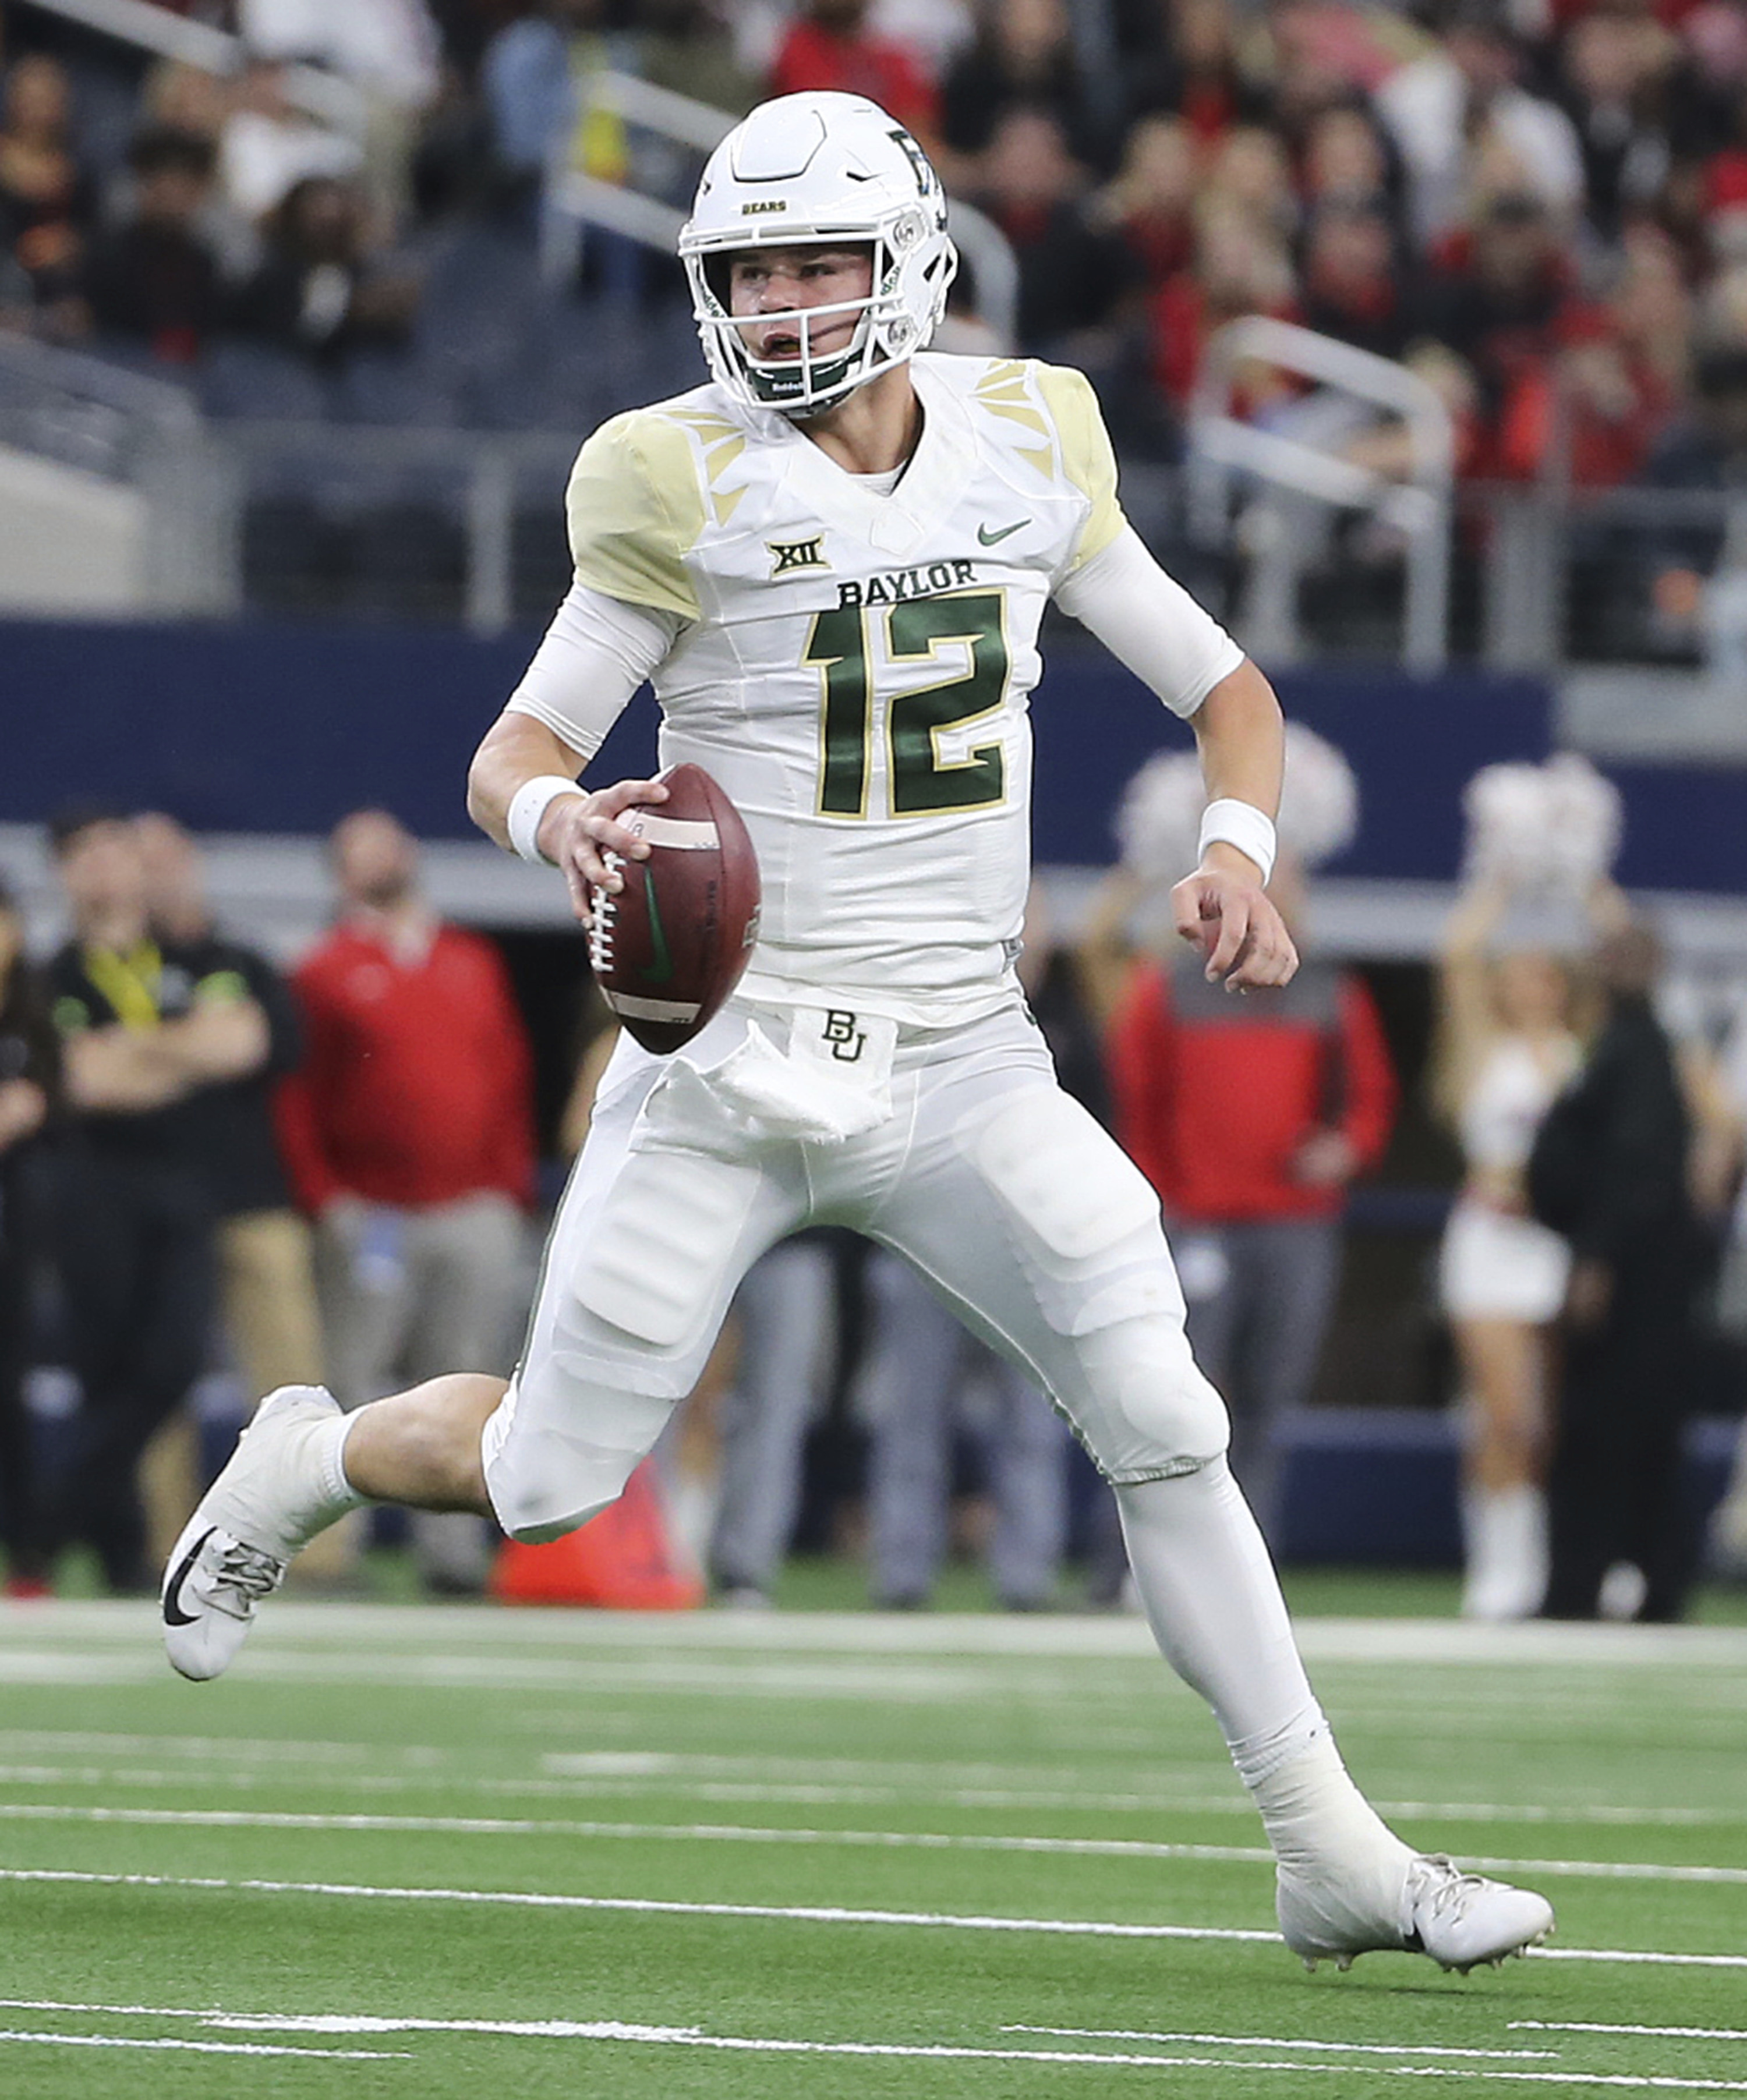 Baylor gets bowl eligible with 35-24 win over Texas Tech